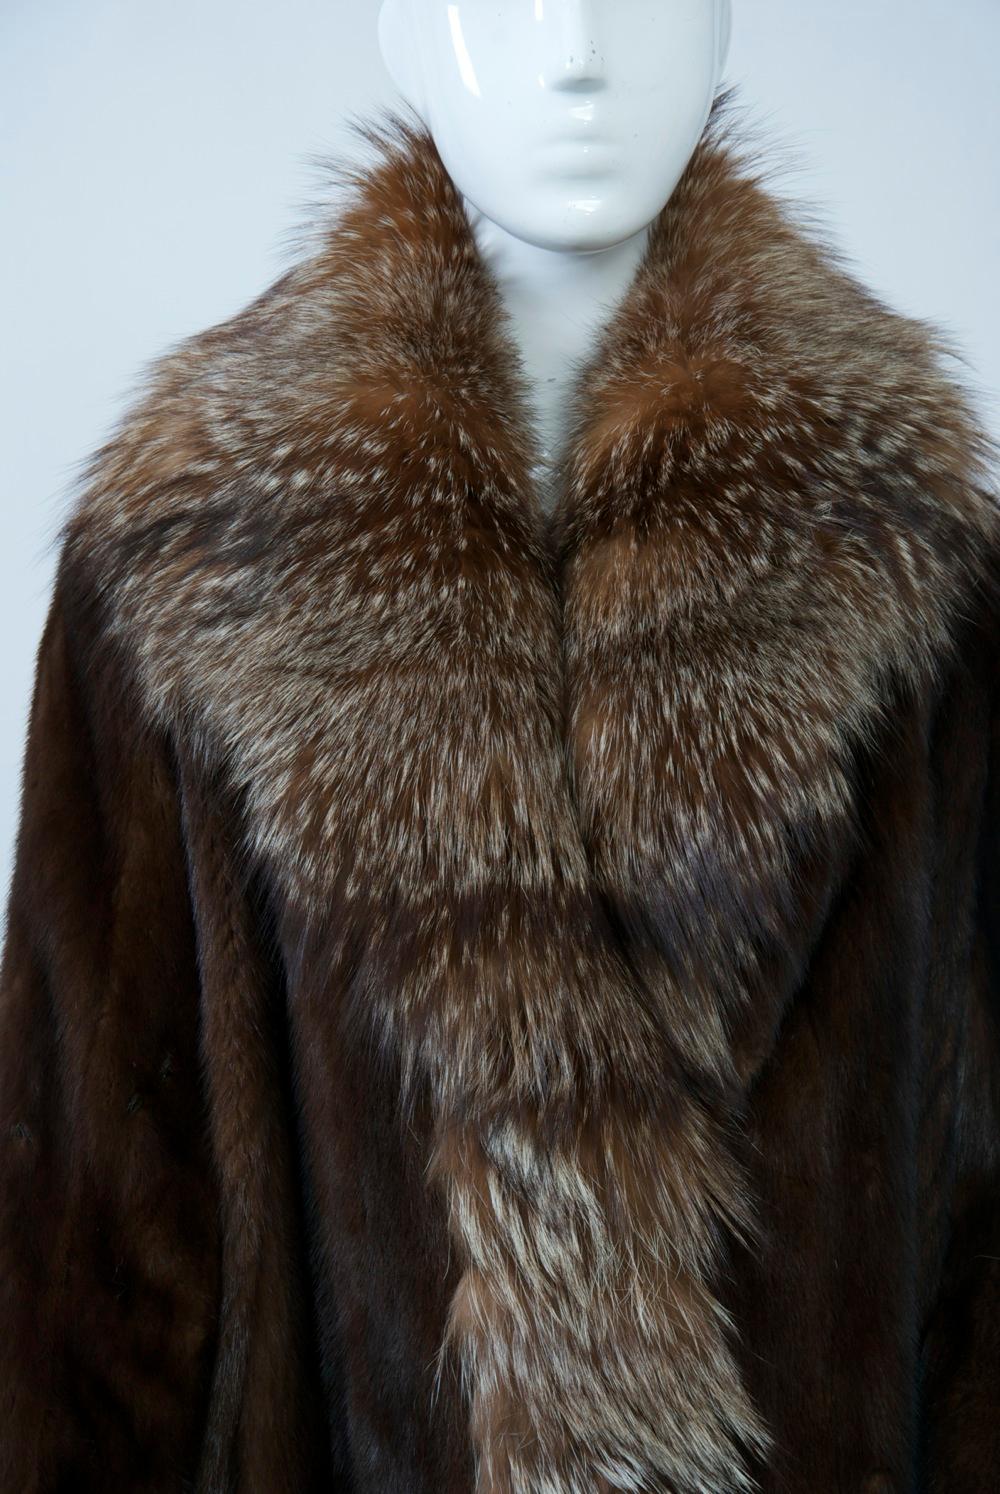 Eye-catching mahogany mink coat featuring fox trim around all edges and cuffs. Lustrous vertical mink skins with side pockets. Can be buttoned up at neck for extra warmth. Fur clasps in front. Animal print and floral lining. Labelled 